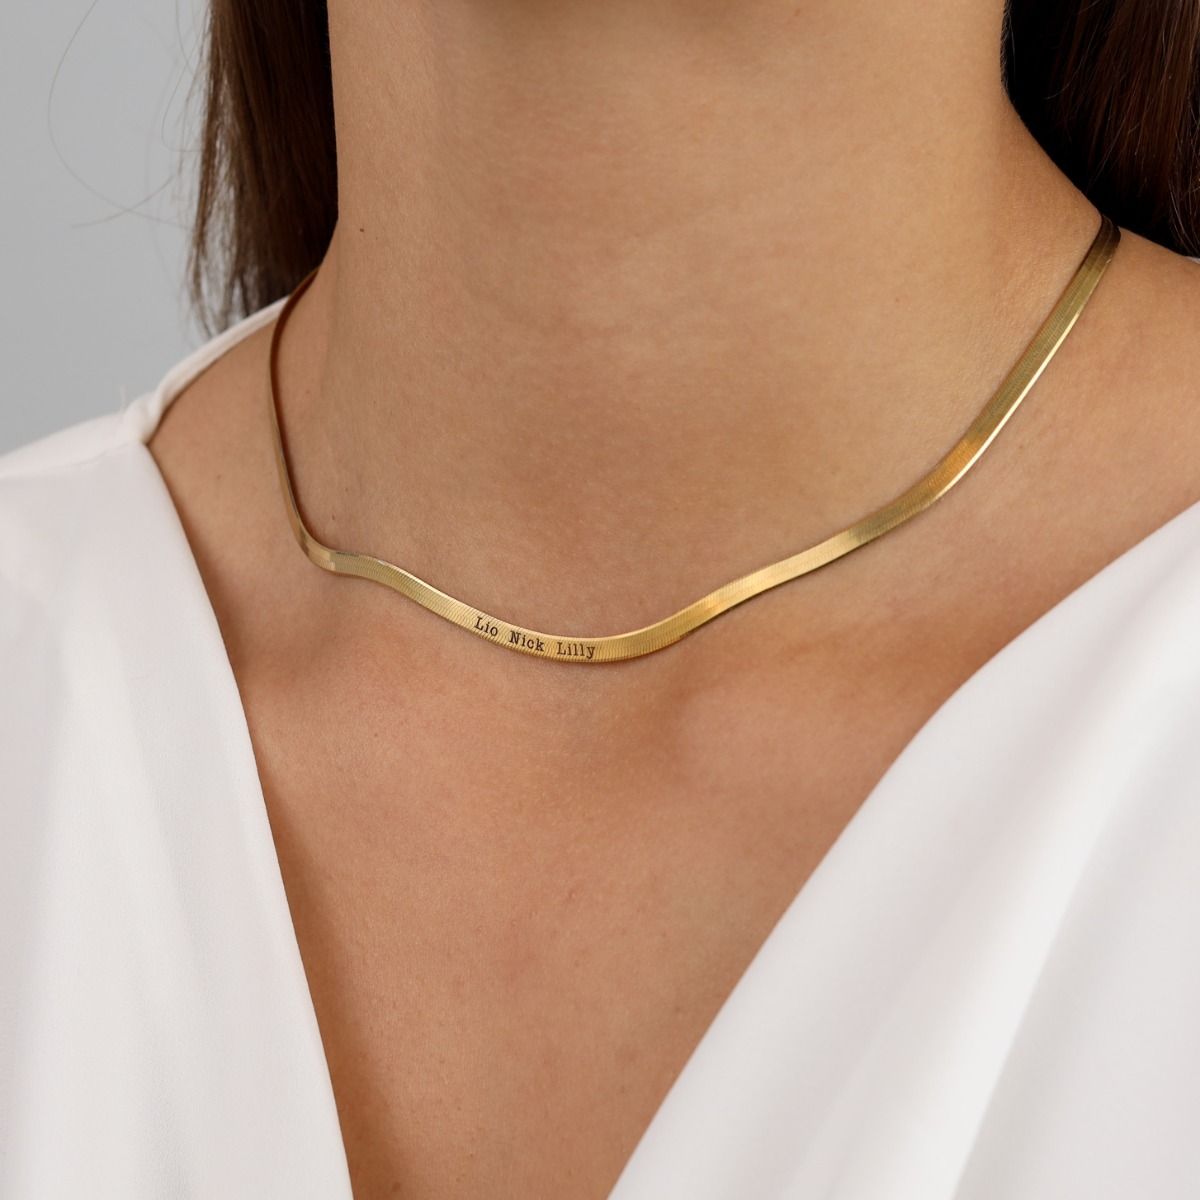 3.0mm Herringbone Chain Necklace in Solid 14K Gold - 18